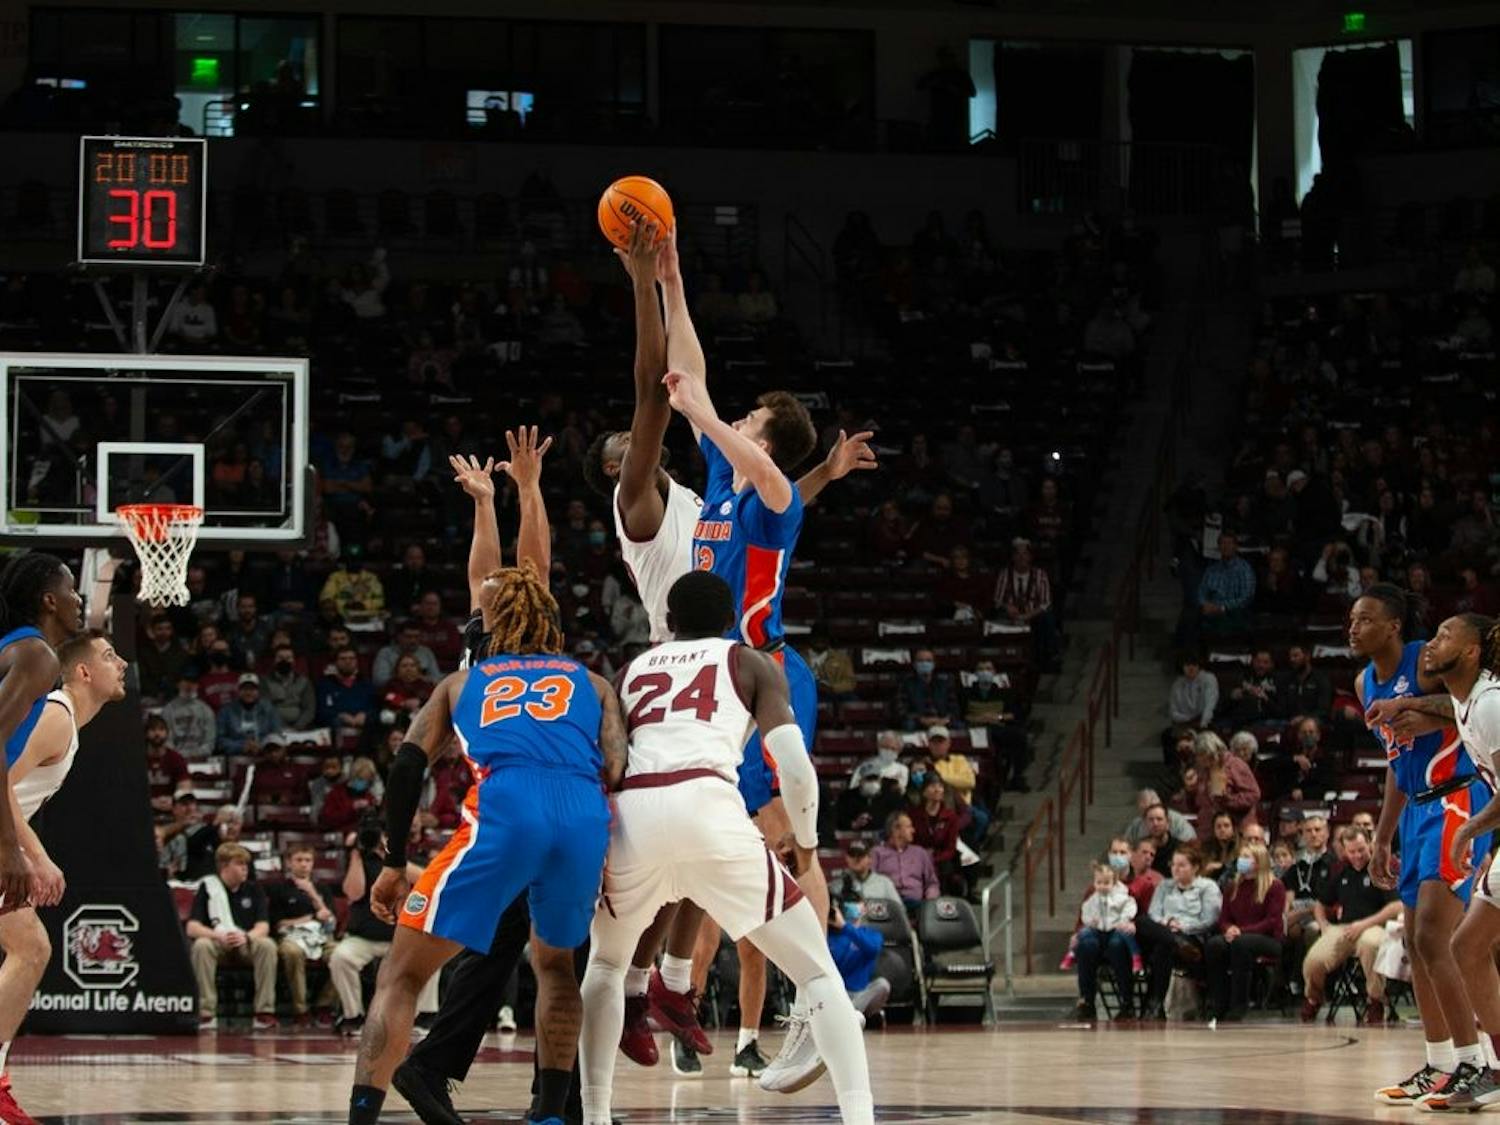 Junior forward Wildens Leveque wins the tip off for Carolina at the start of the game against the Florida Gators on Jan. 15, 2022 in Columbia, SC. The Gamecocks lost to Florida 71-63.